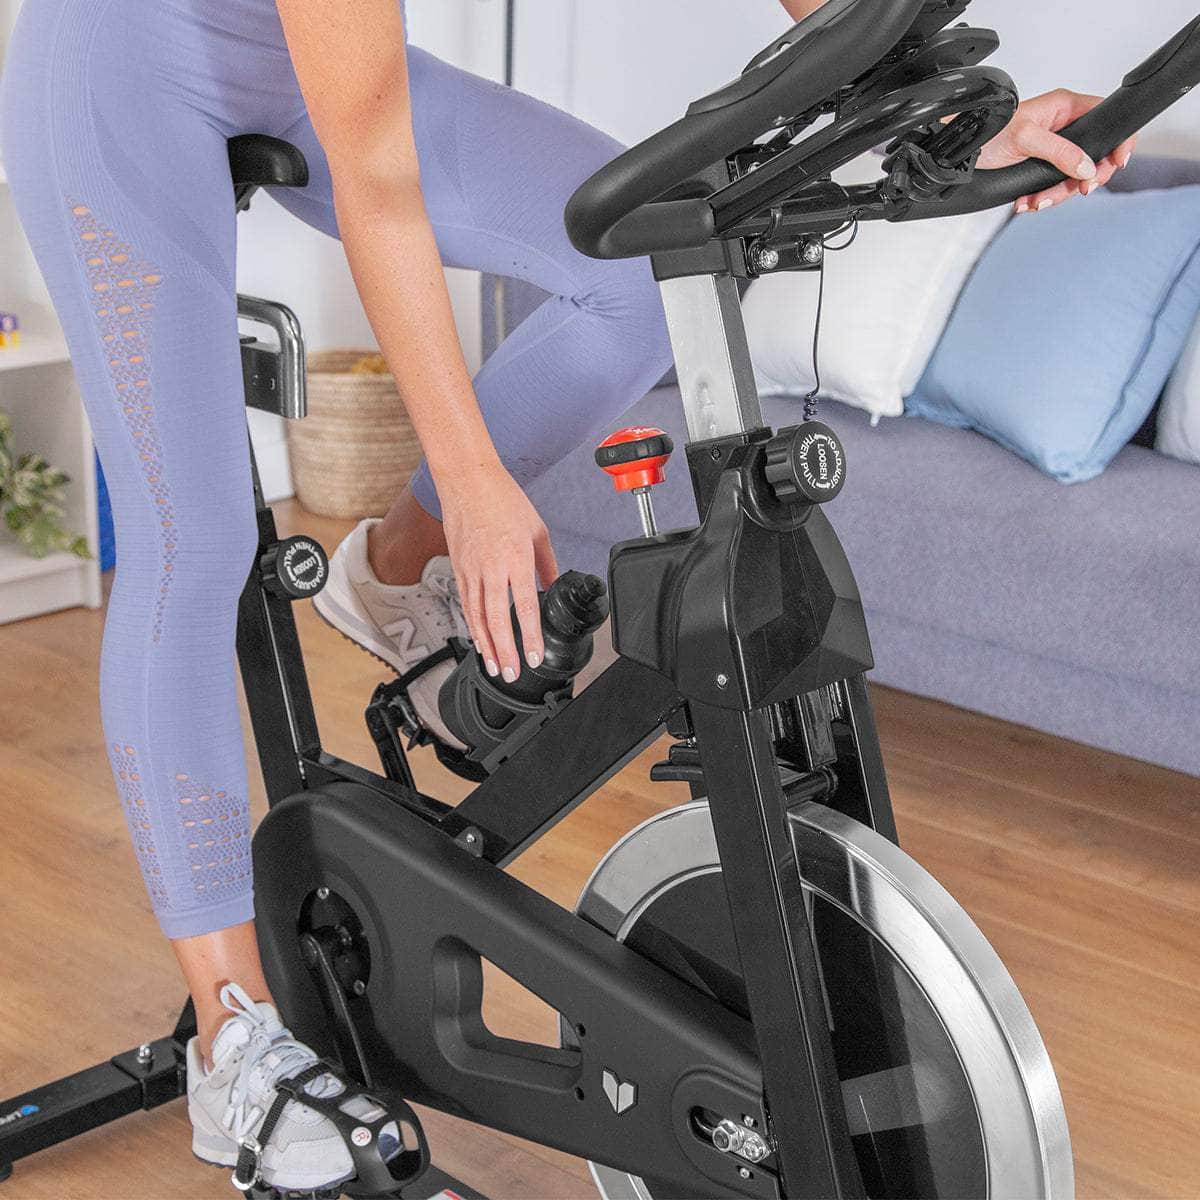 Revolutionize Your Fitness: SM-410 Magnetic Spin Bike